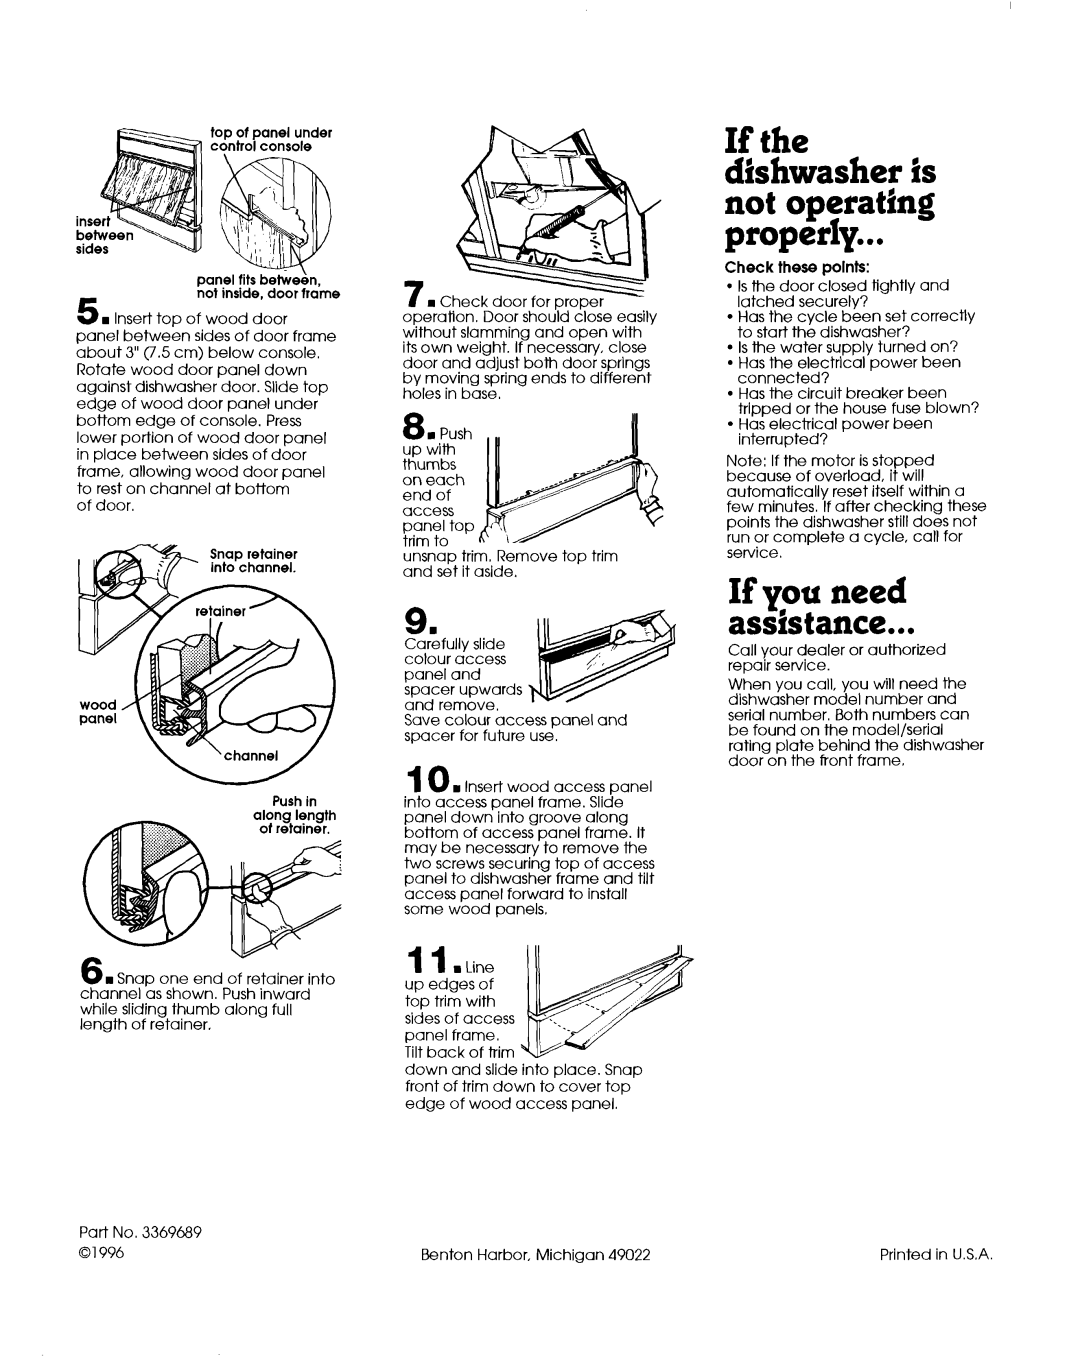 Whirlpool 801 installation instructions If you need assistance, If the dishwasher is not operating properly 